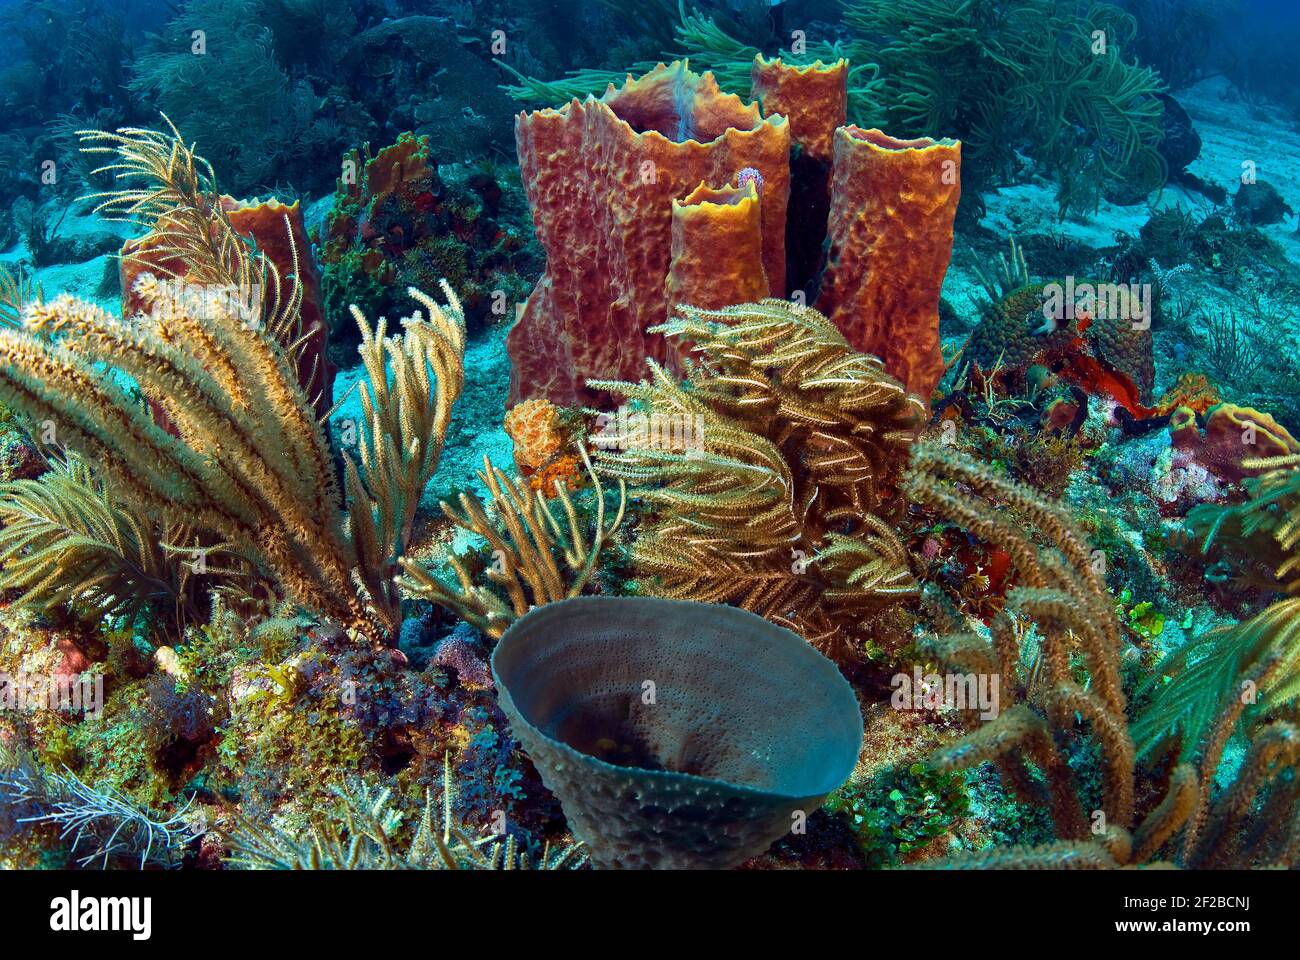 Gorgonians and sponges on healthy Caribbean reef, Rosario Islands, Columbia Stock Photo